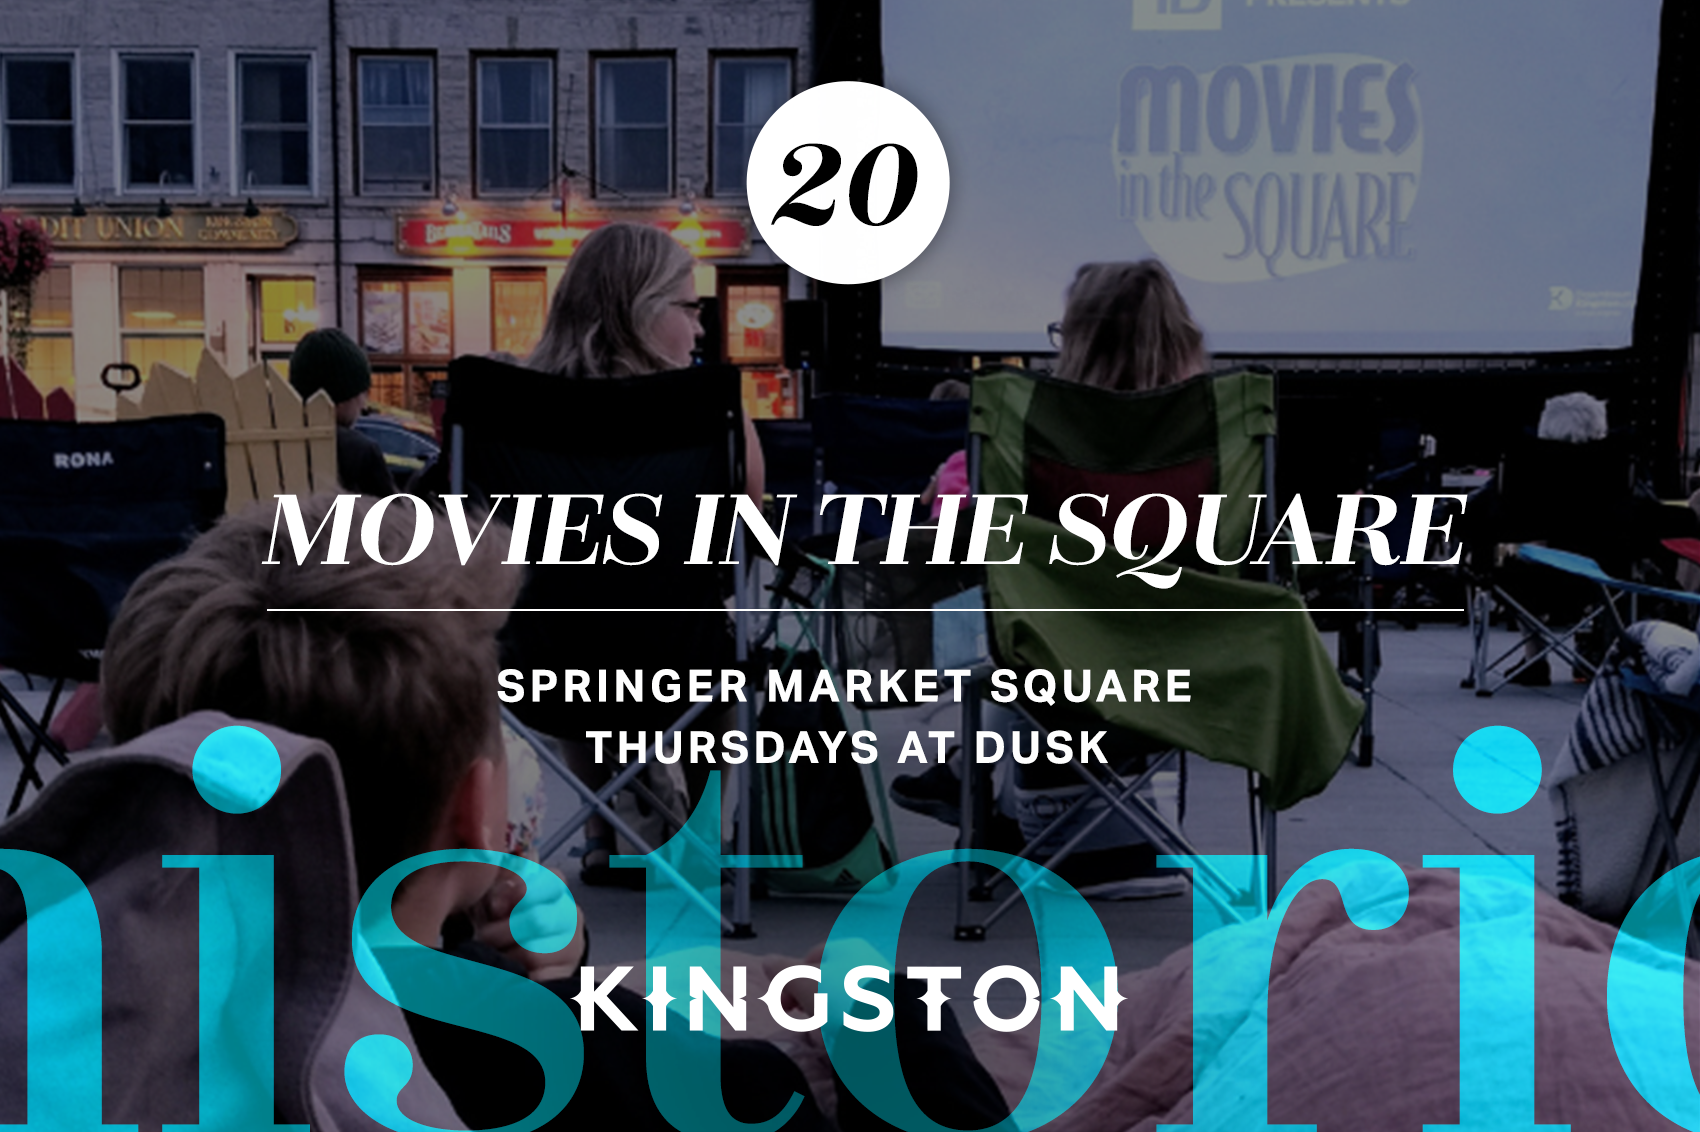 Movies in the Square